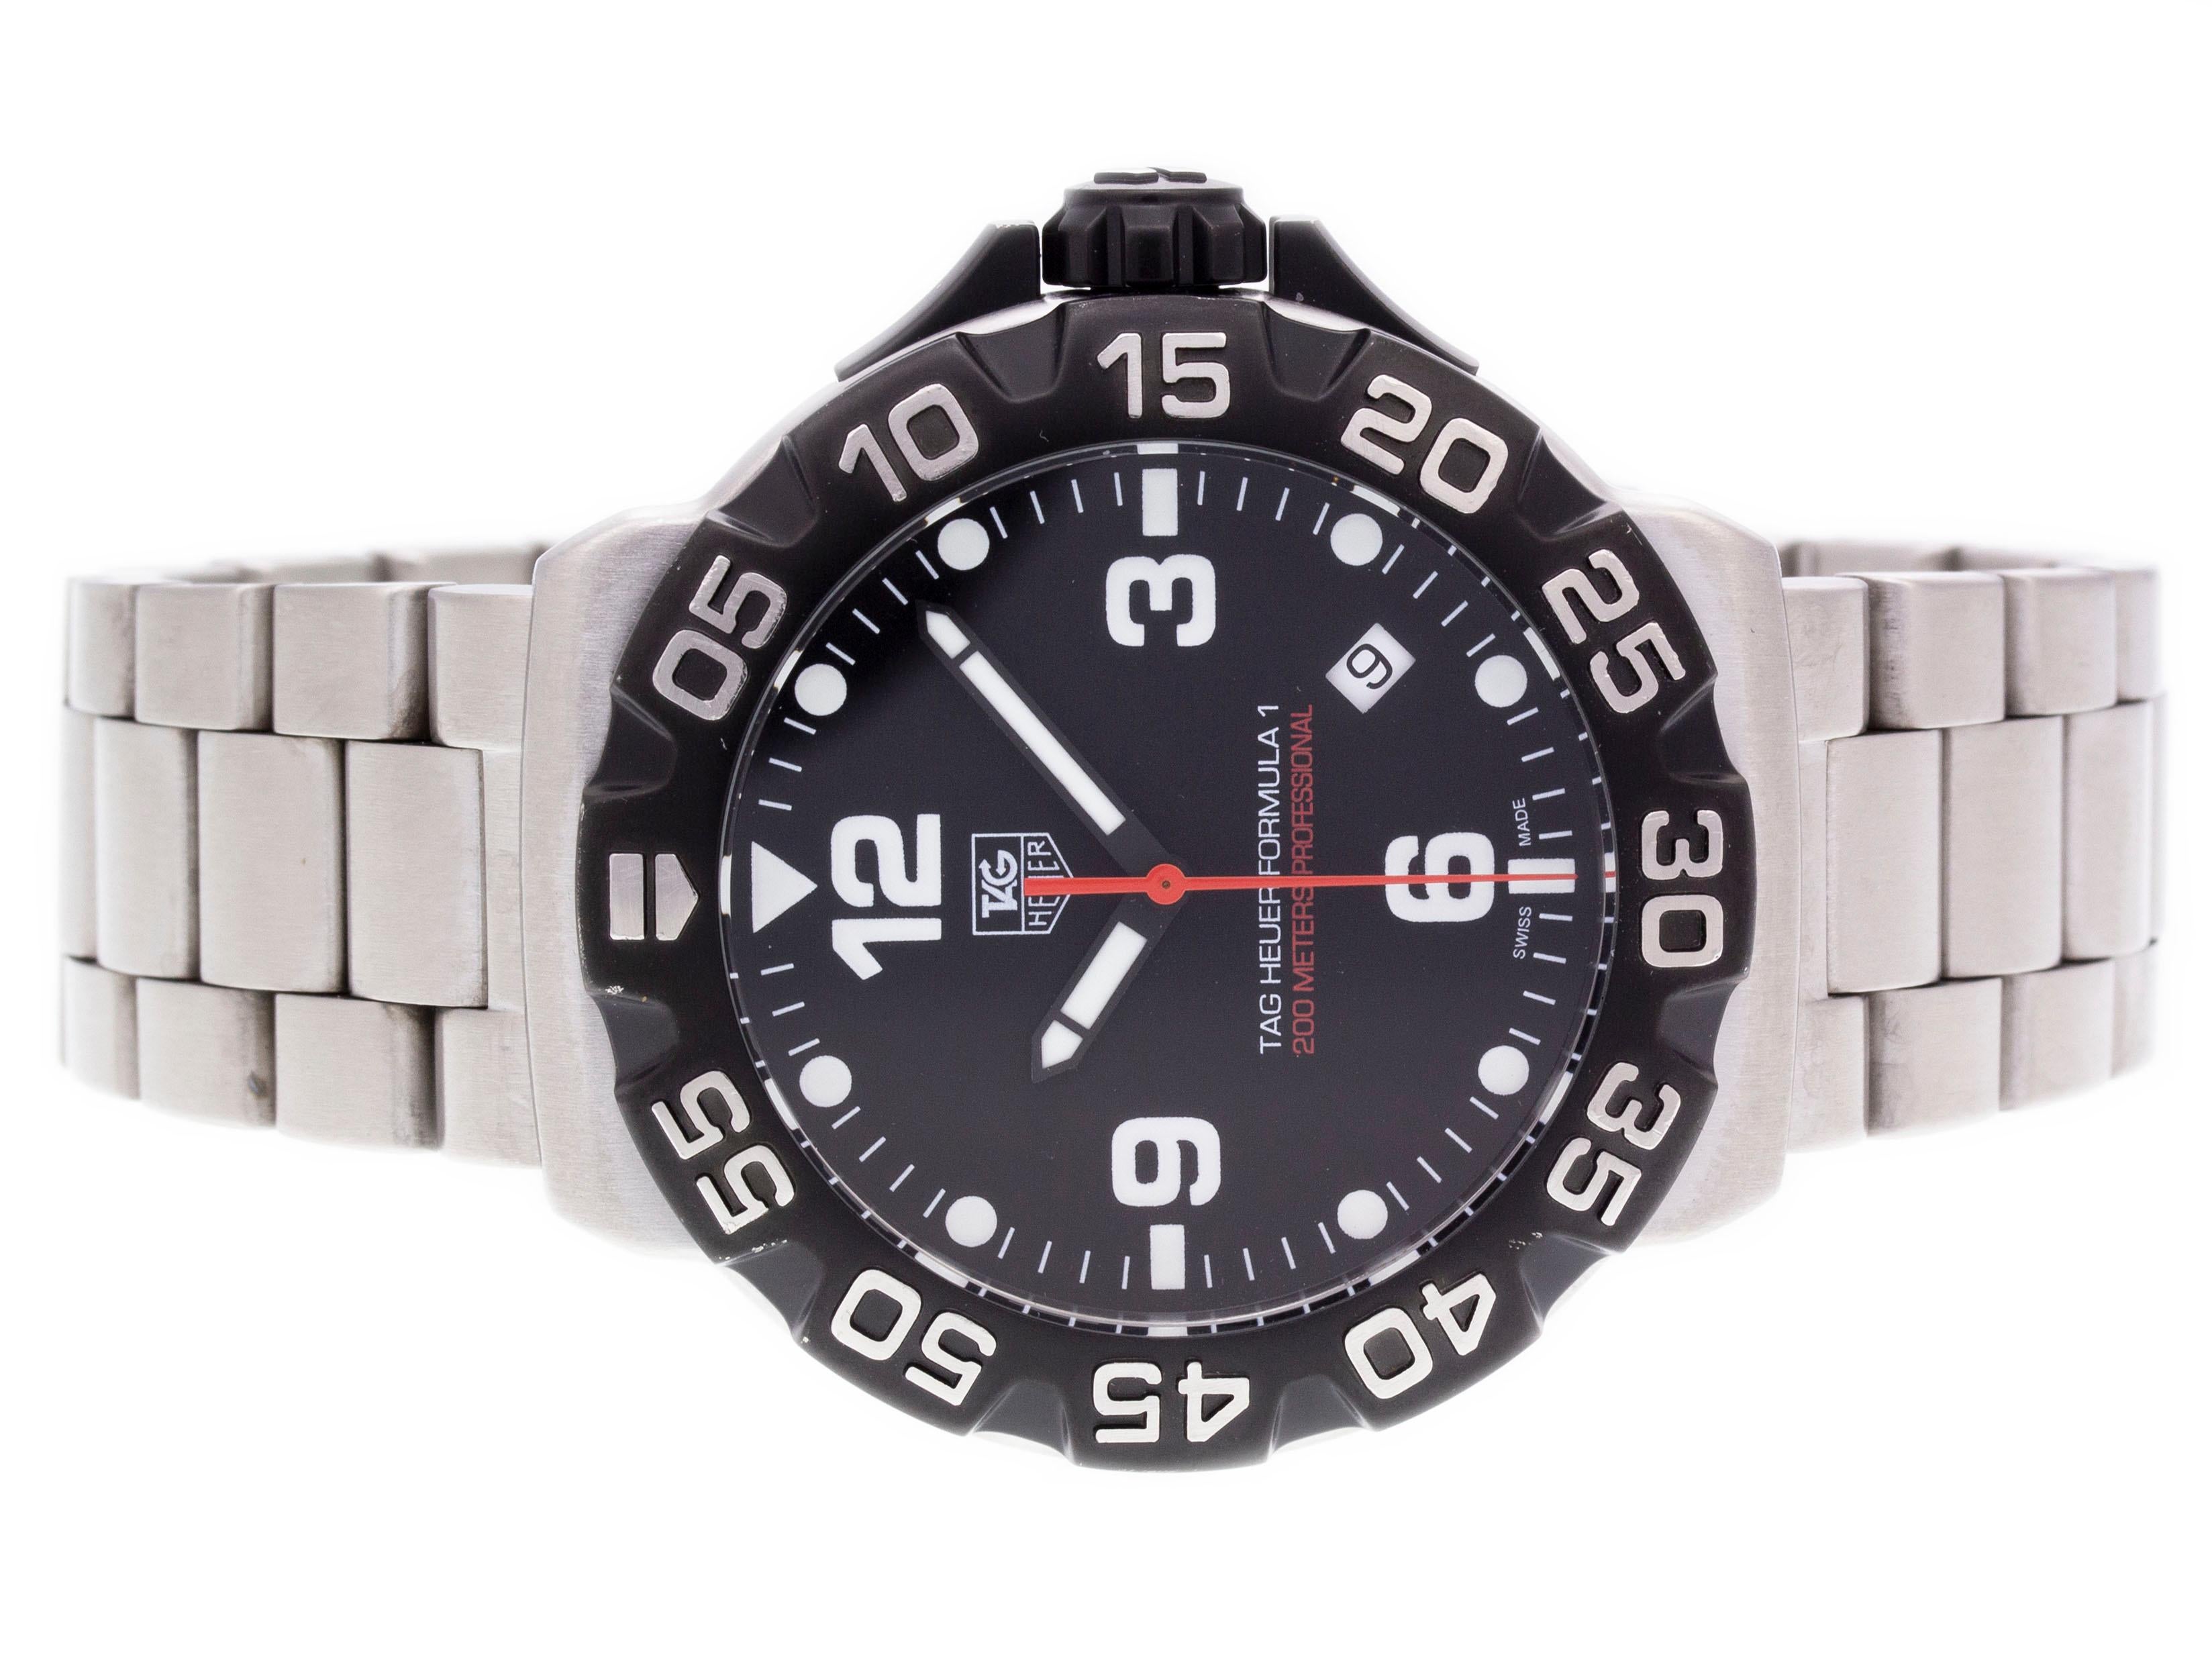 Stainless steel Tag Heuer Formula 1 quartz watch with a 41mm case, black dial, and bracelet with folding clasp. Features include hours, minutes, seconds and date. Comes with a Gift Box and 2 Year Store Warranty.​

Brand	Tag Heuer
Series	Formula